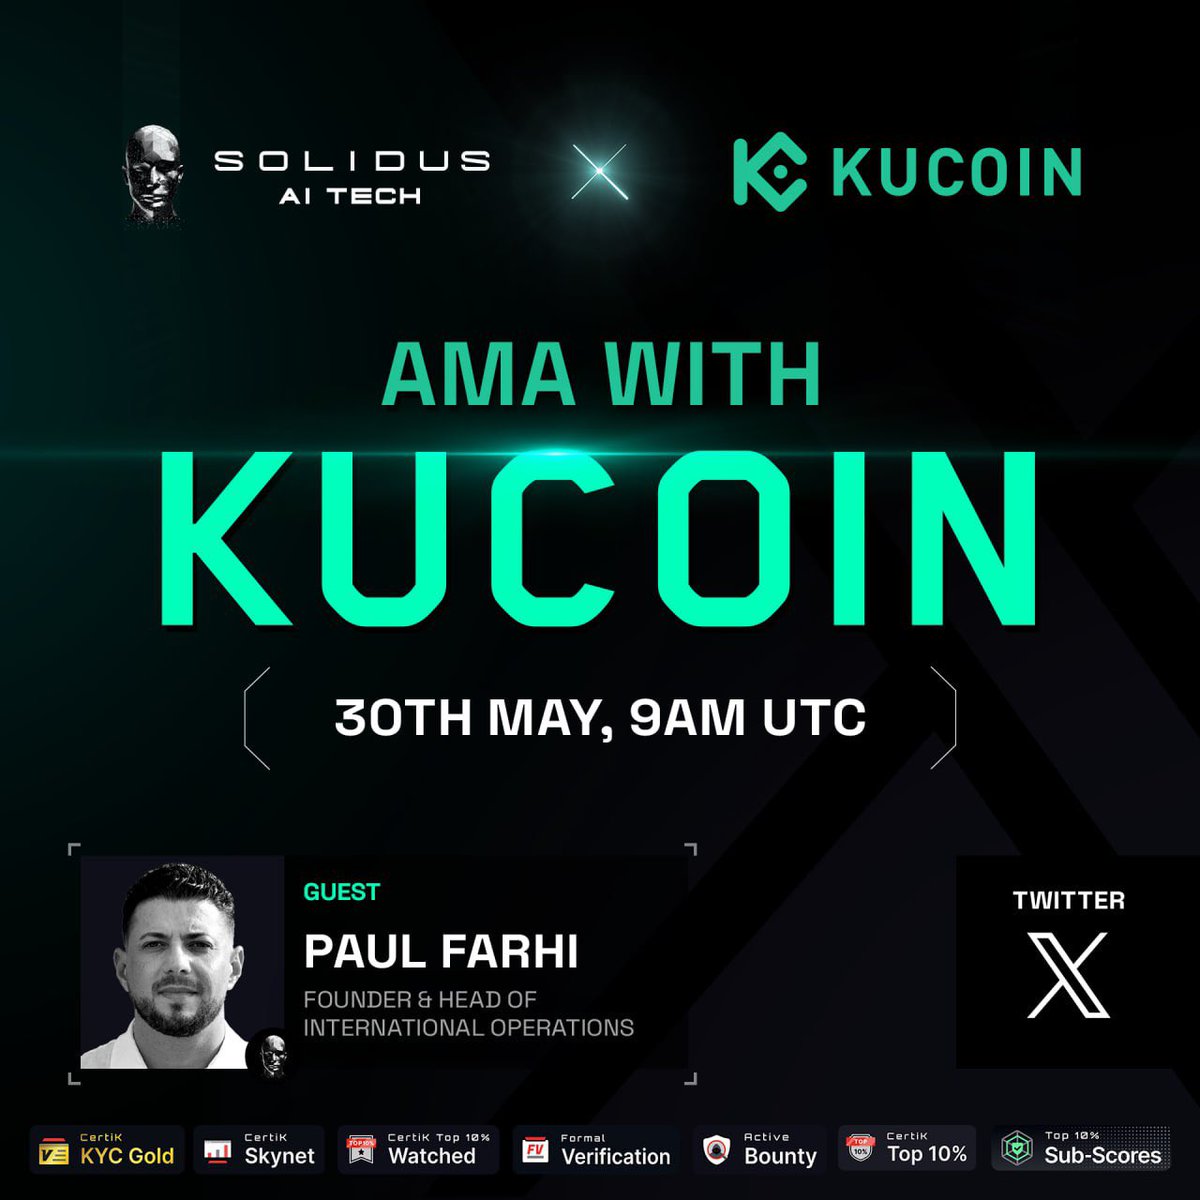 🎙️ AITECH x Kucoin AMA! 

🗣️ Join us for an insightful AMA with KuCoin, featuring Paul Farhi! Don't miss your chance to ask questions and learn more about our project and the latest news.

🗓️ 30th May
⏰ 9AM UTC

✨ Stay tuned for more details